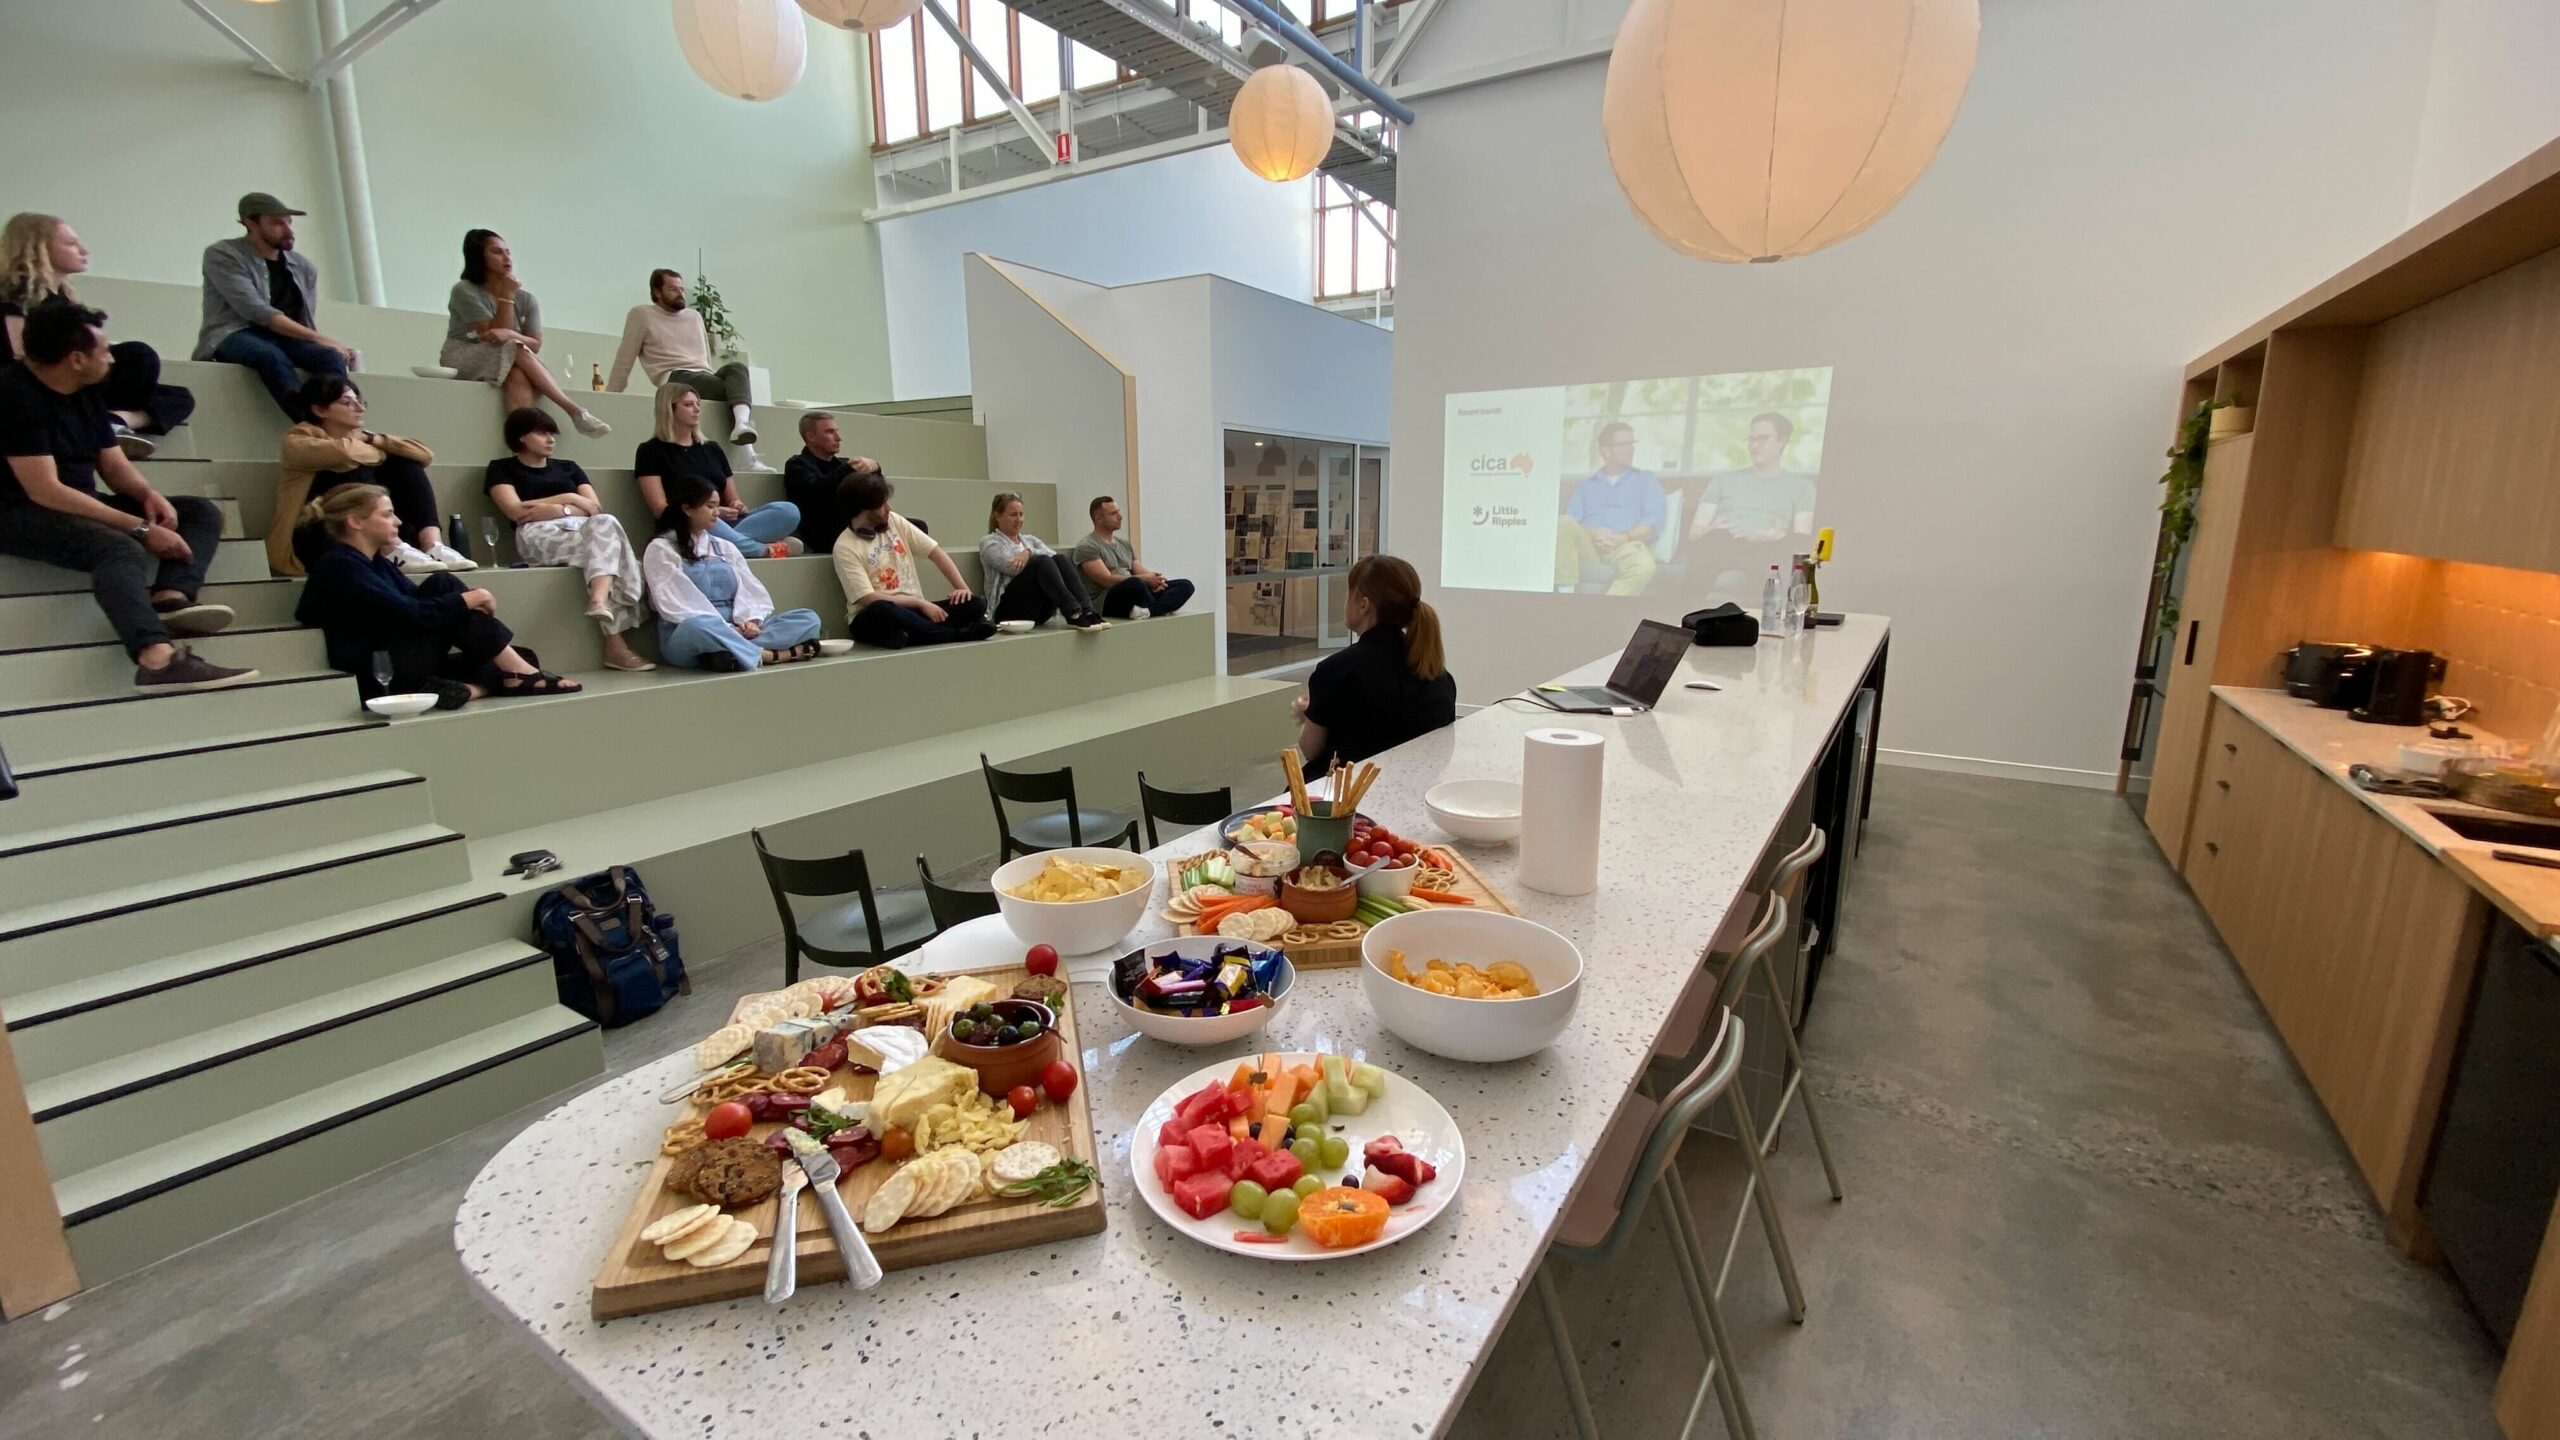 Anthologie office with the team sitting on the green bleachers, a presentation projected on the wall, cheese board in the foreground.